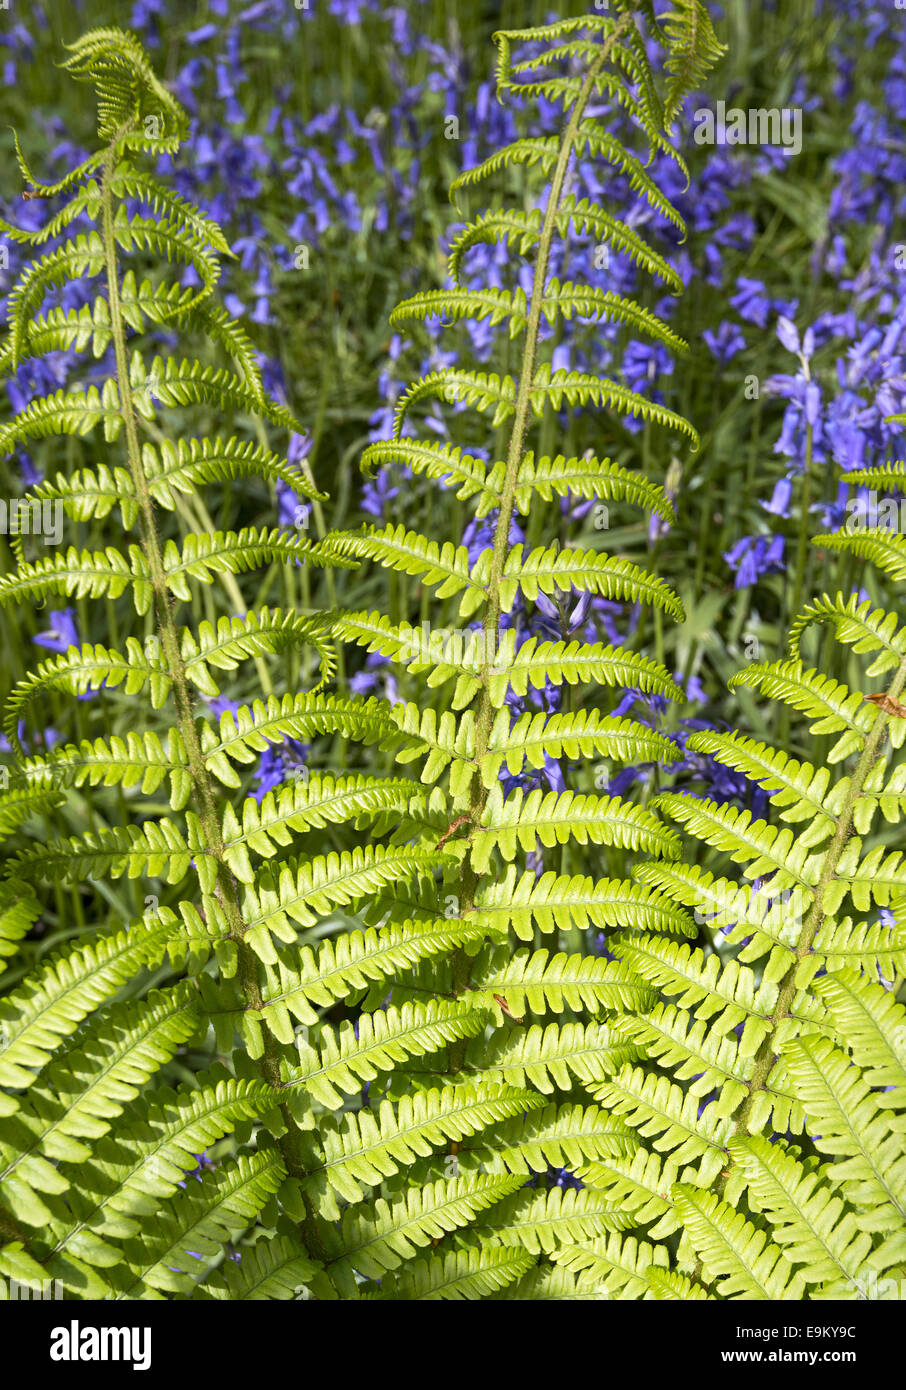 Fresh new ferns surrounded by bluebells Stock Photo